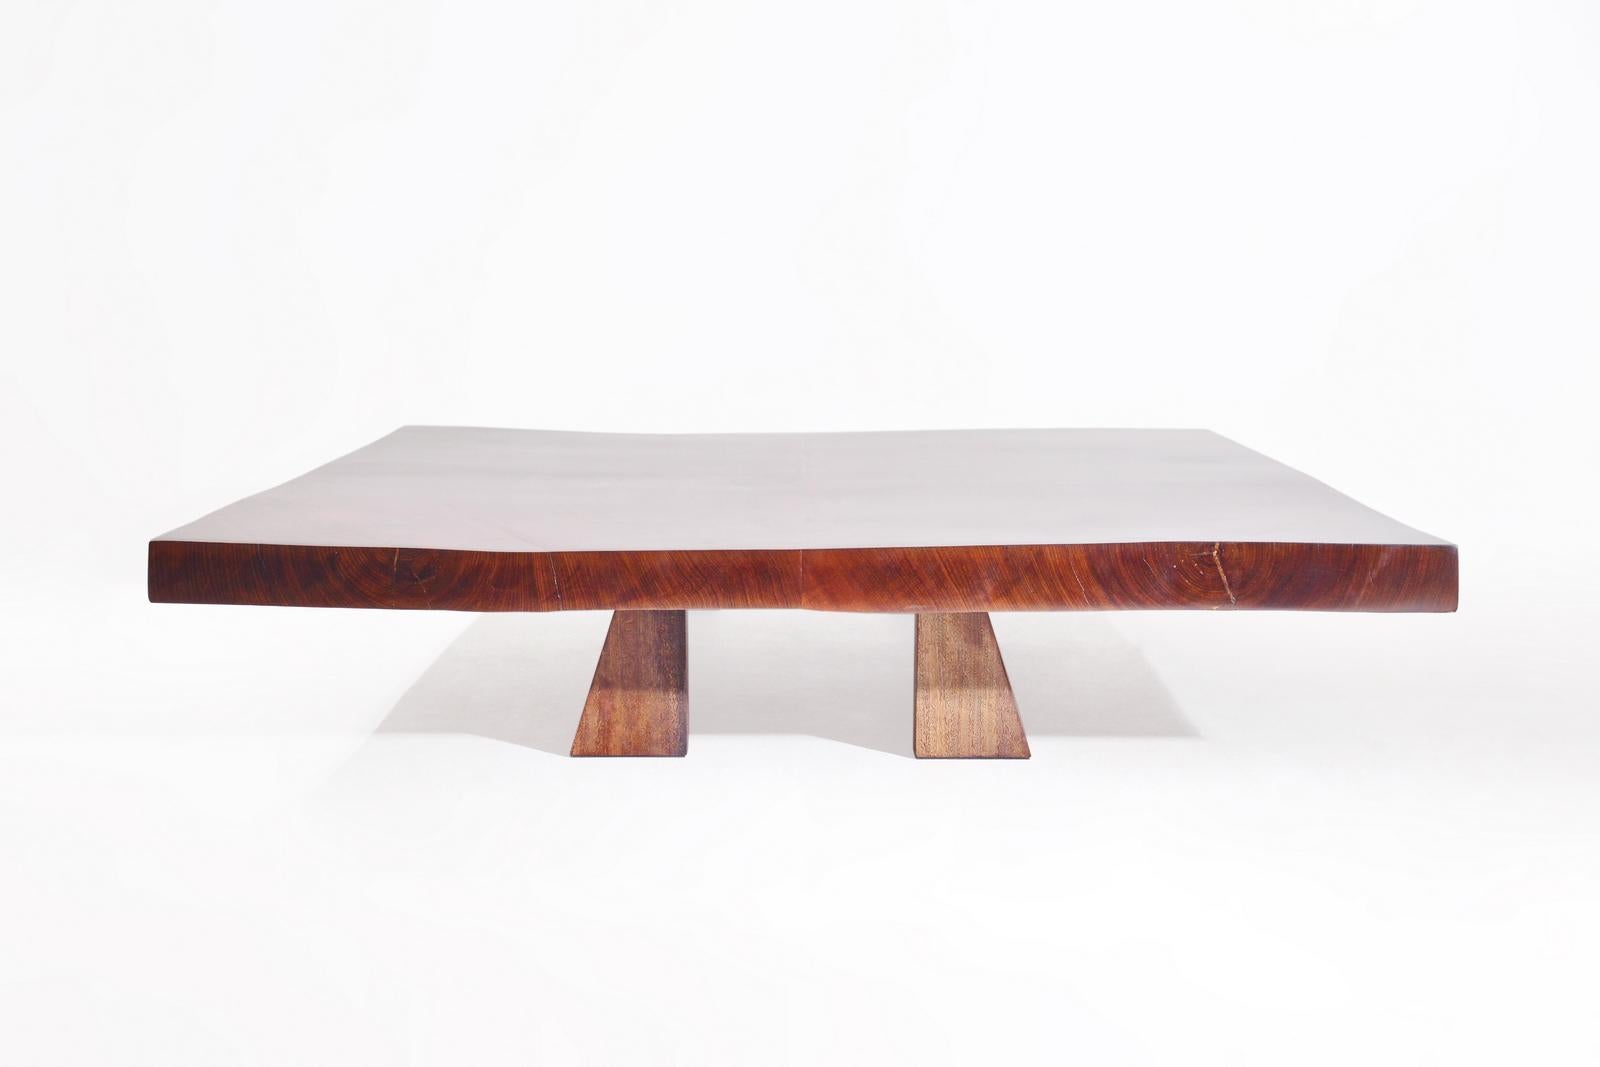 Minimalist Bespoke Low Table, Antique Hardwood Slab and Wood Bases, by P. Tendercool For Sale